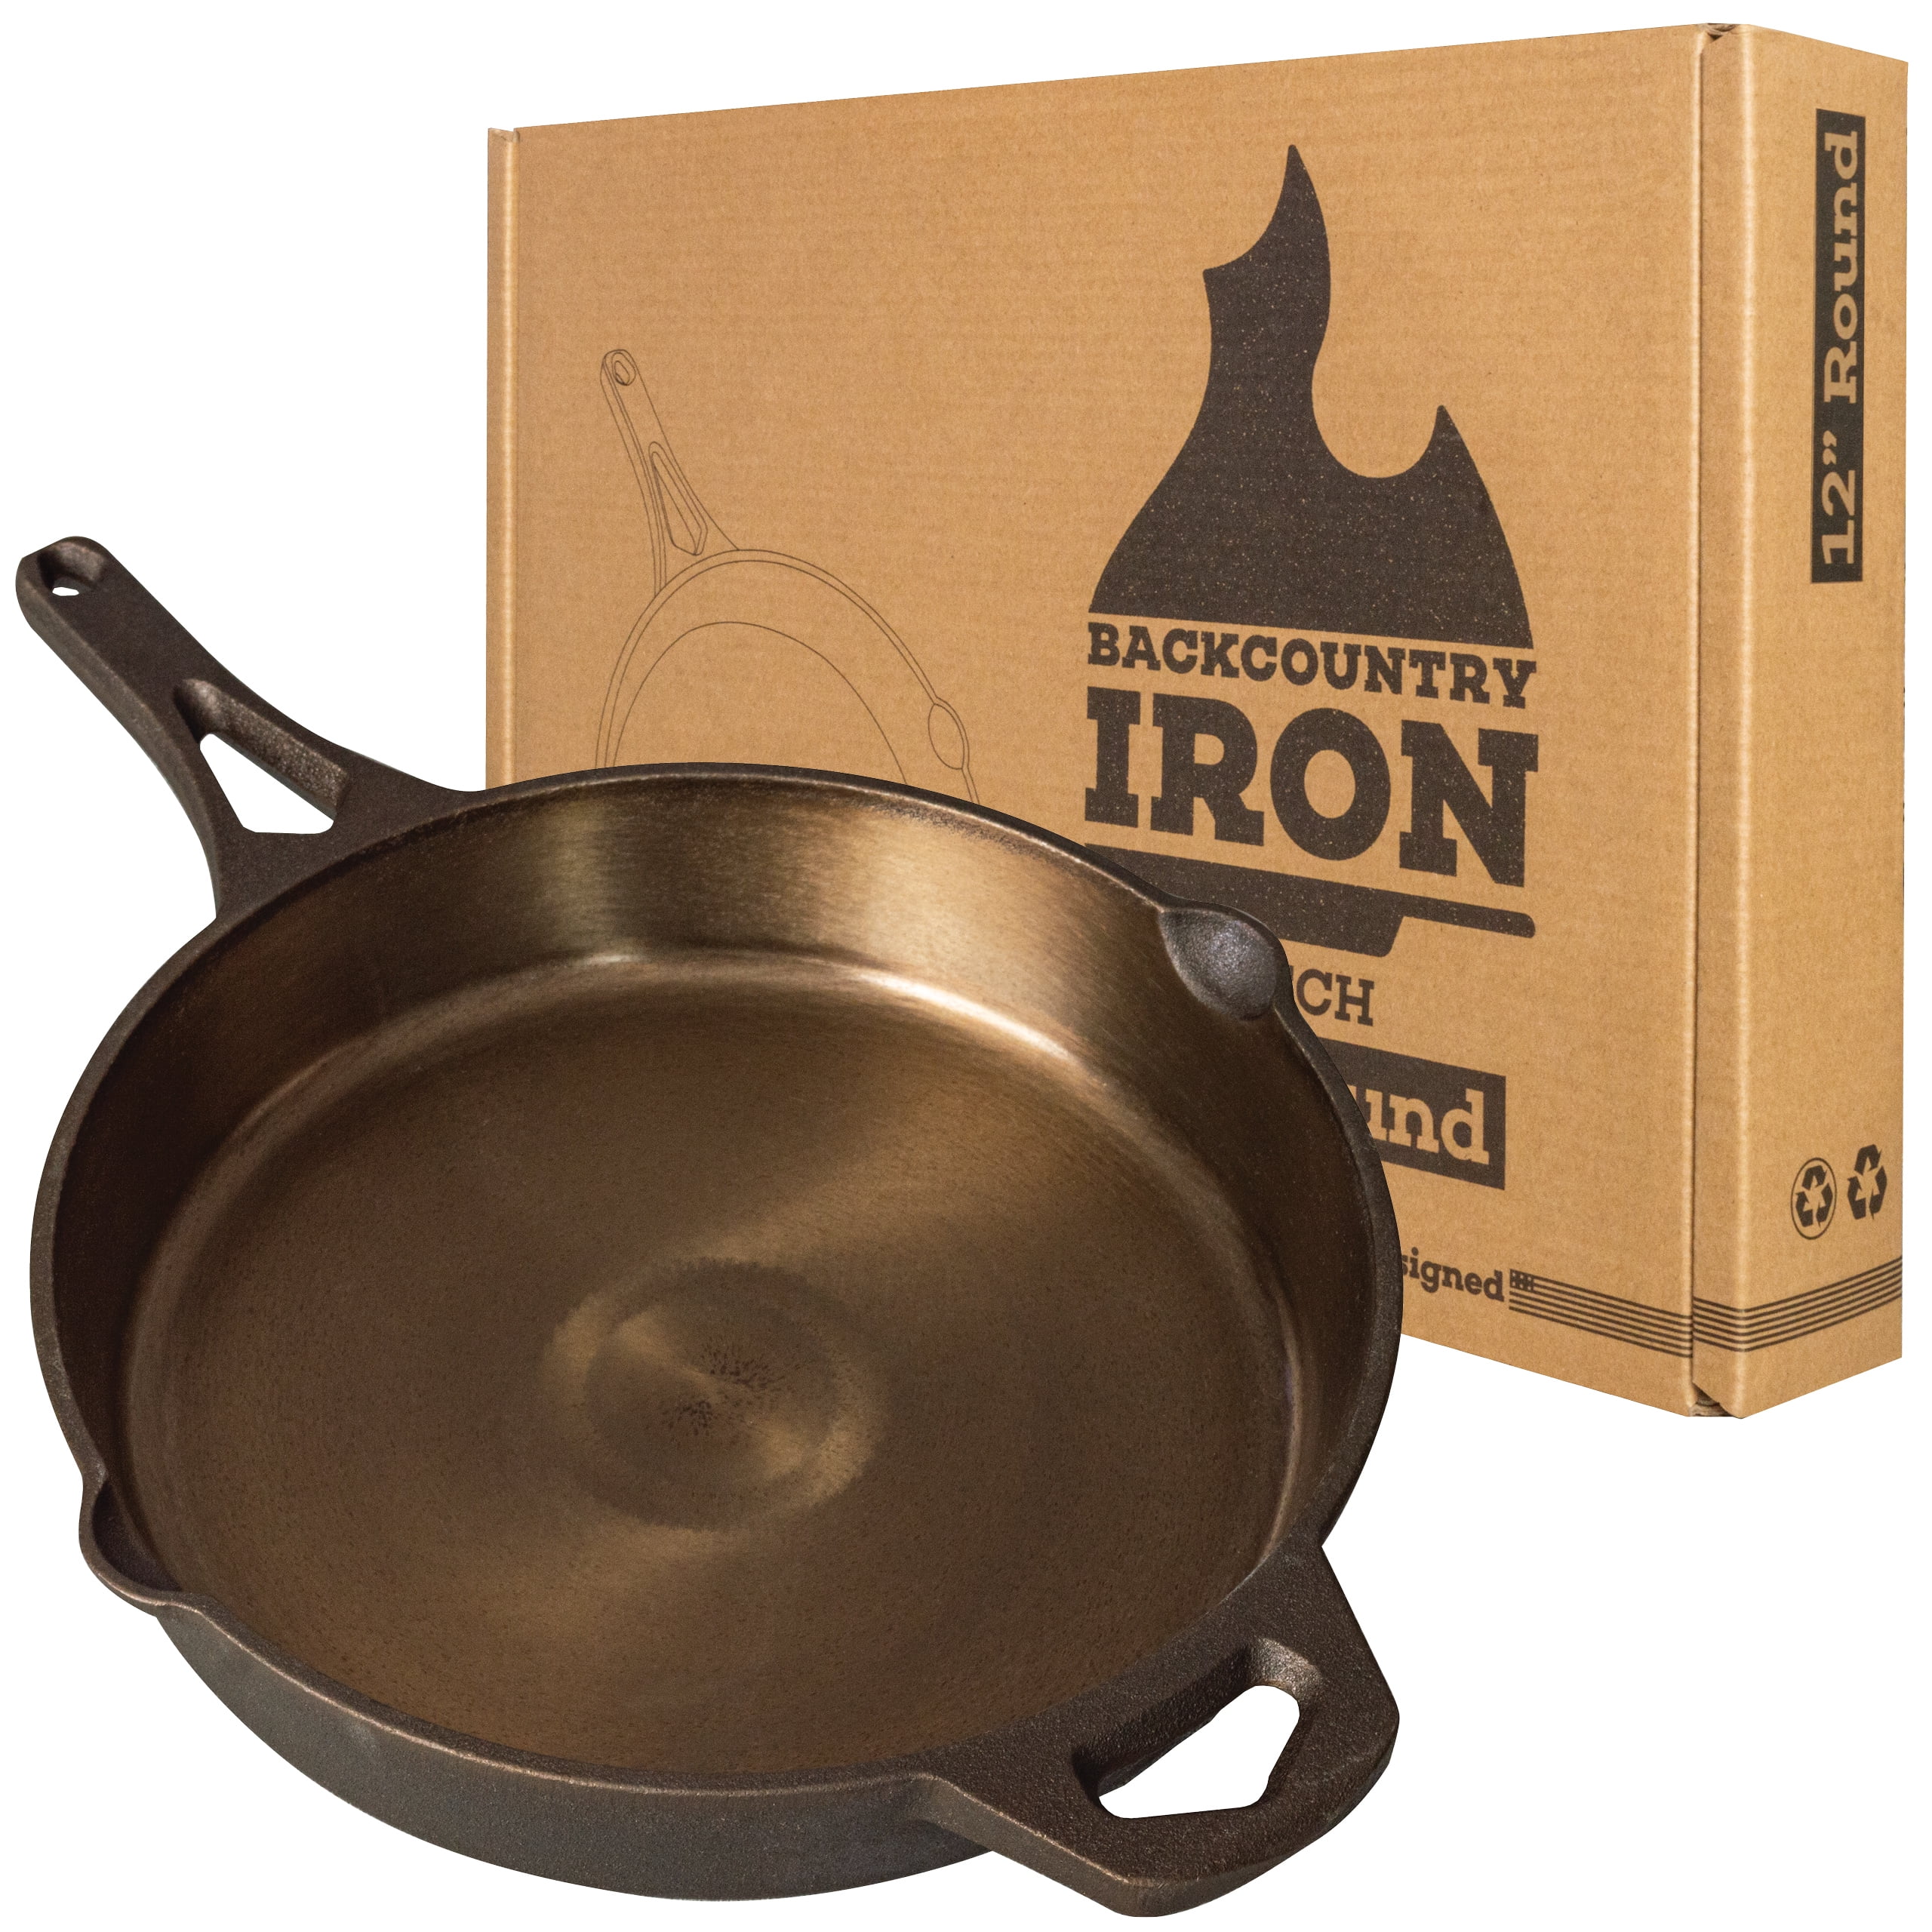 Backcountry Iron 12 Inch Smooth Wasatch Pre-Seasoned Round Cast Iron Skillet  